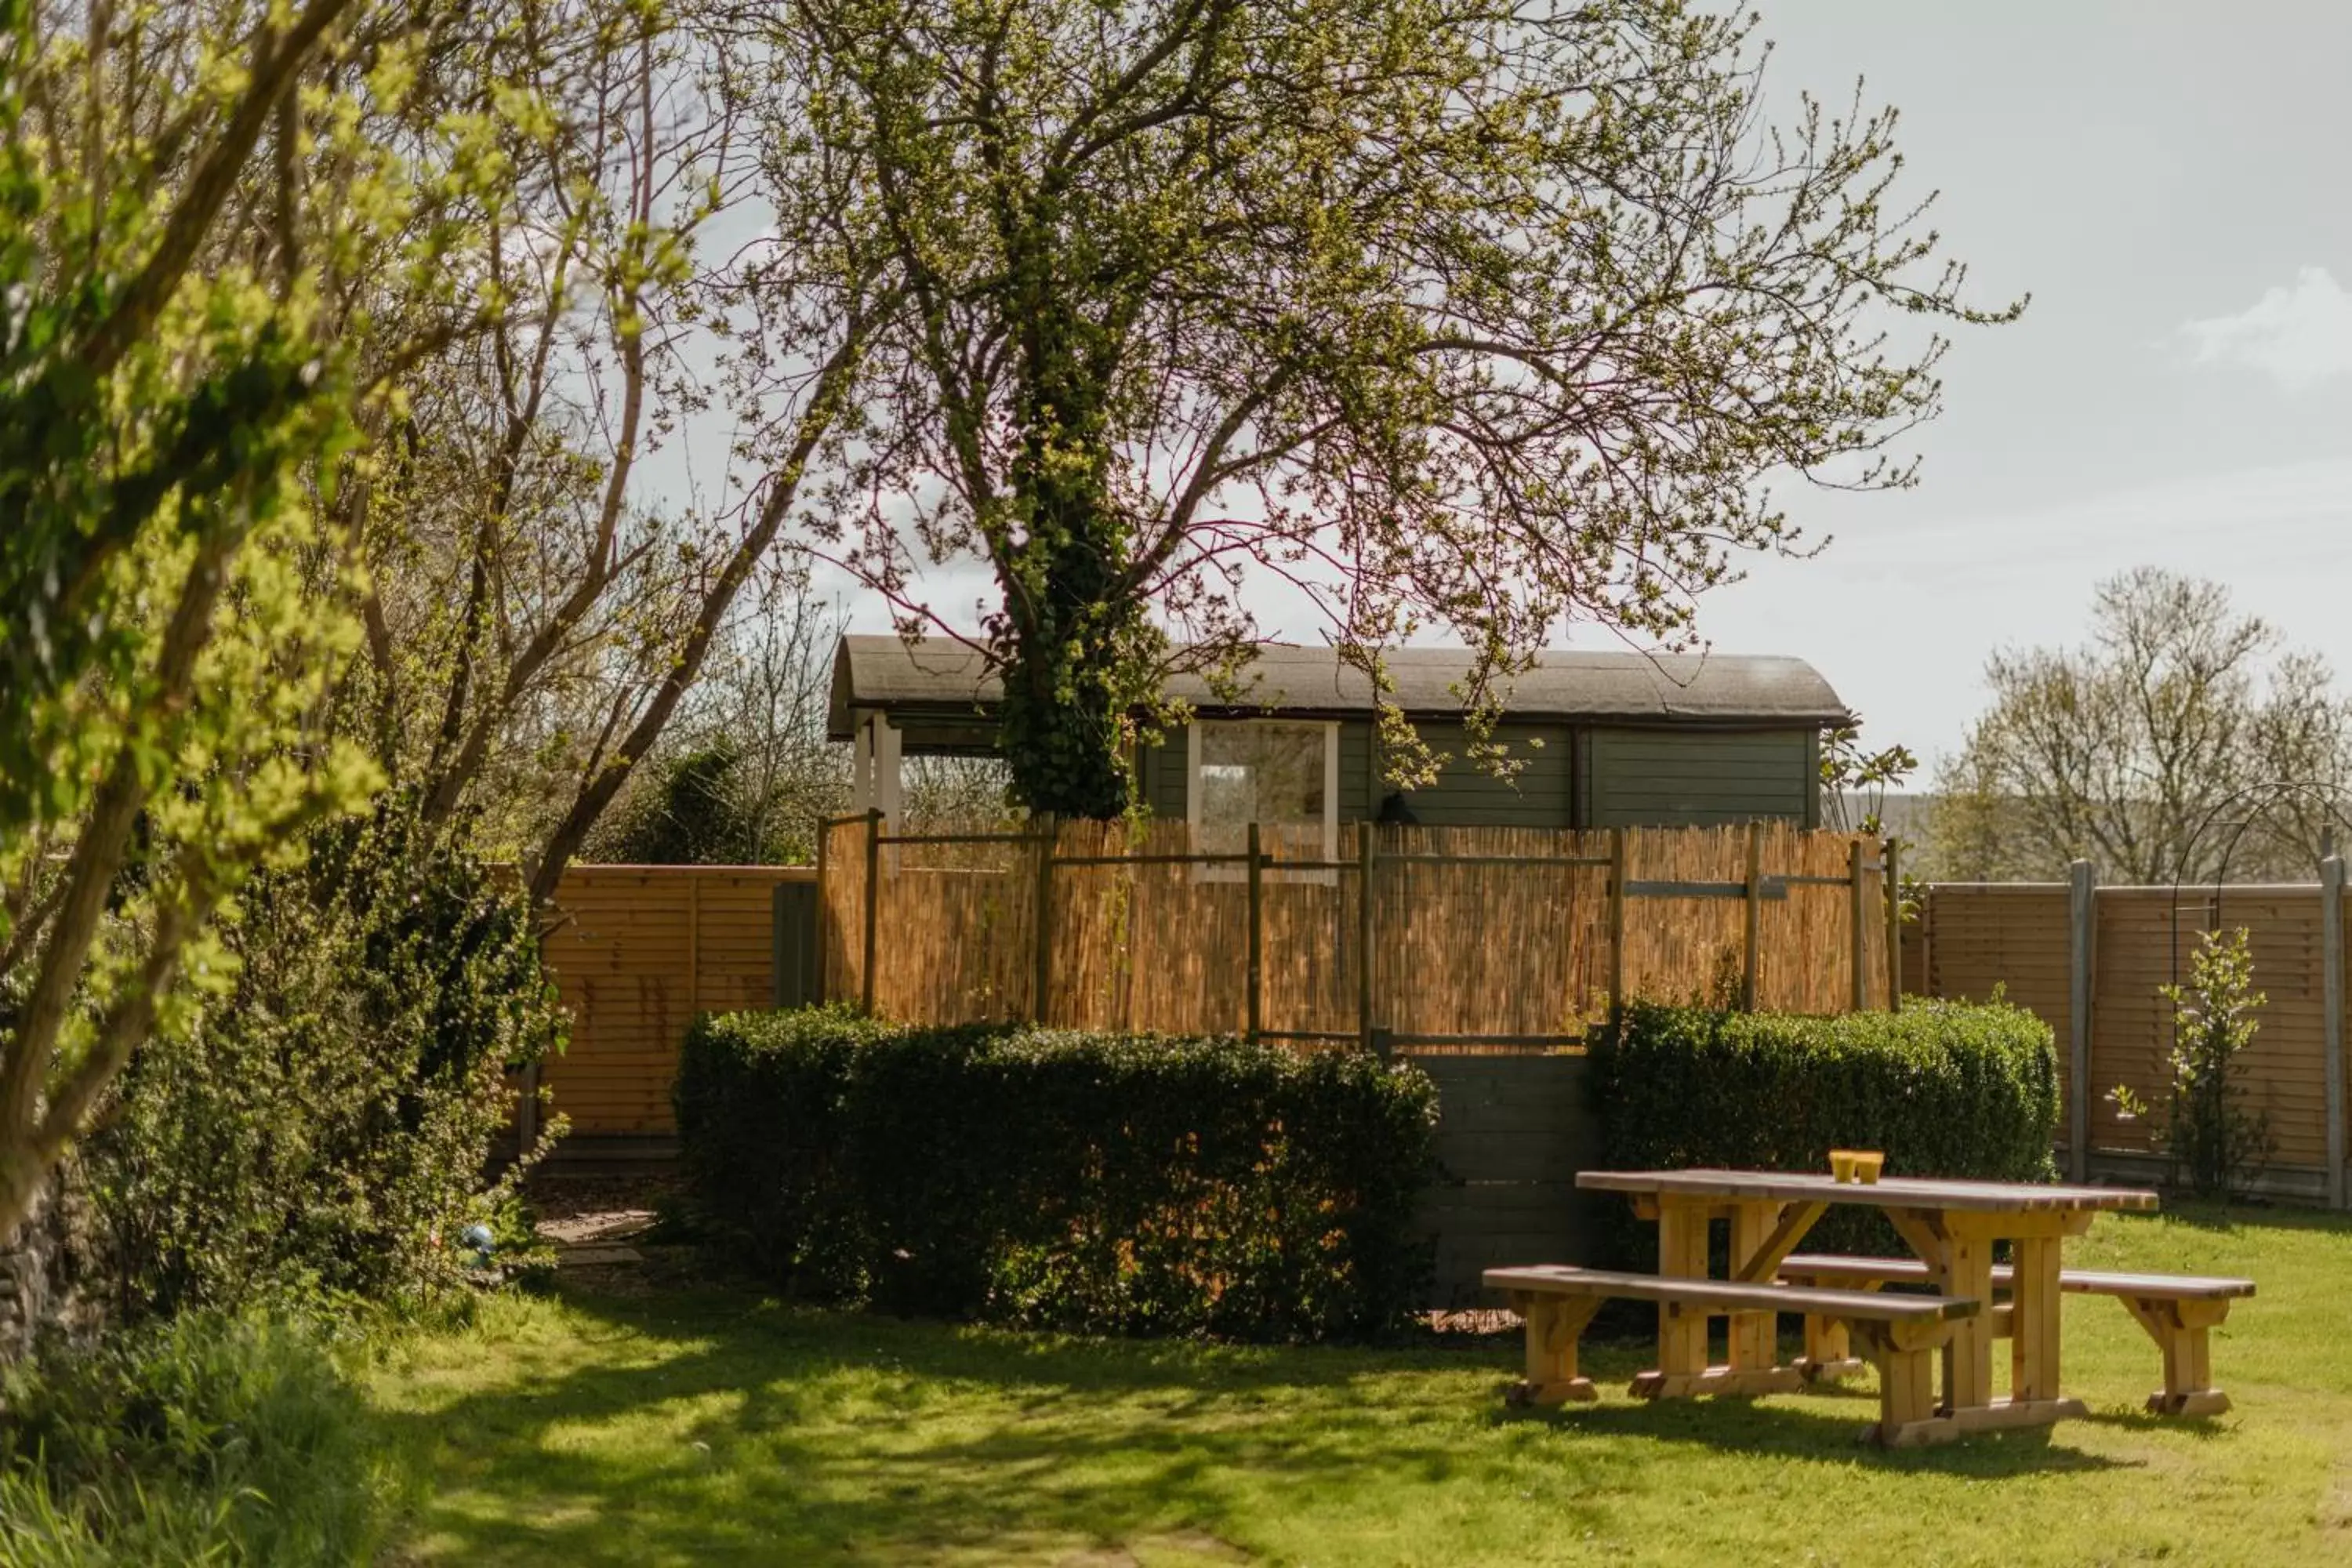 Property Building in Little England Retreats - Cottage, Yurt and Shepherd Huts